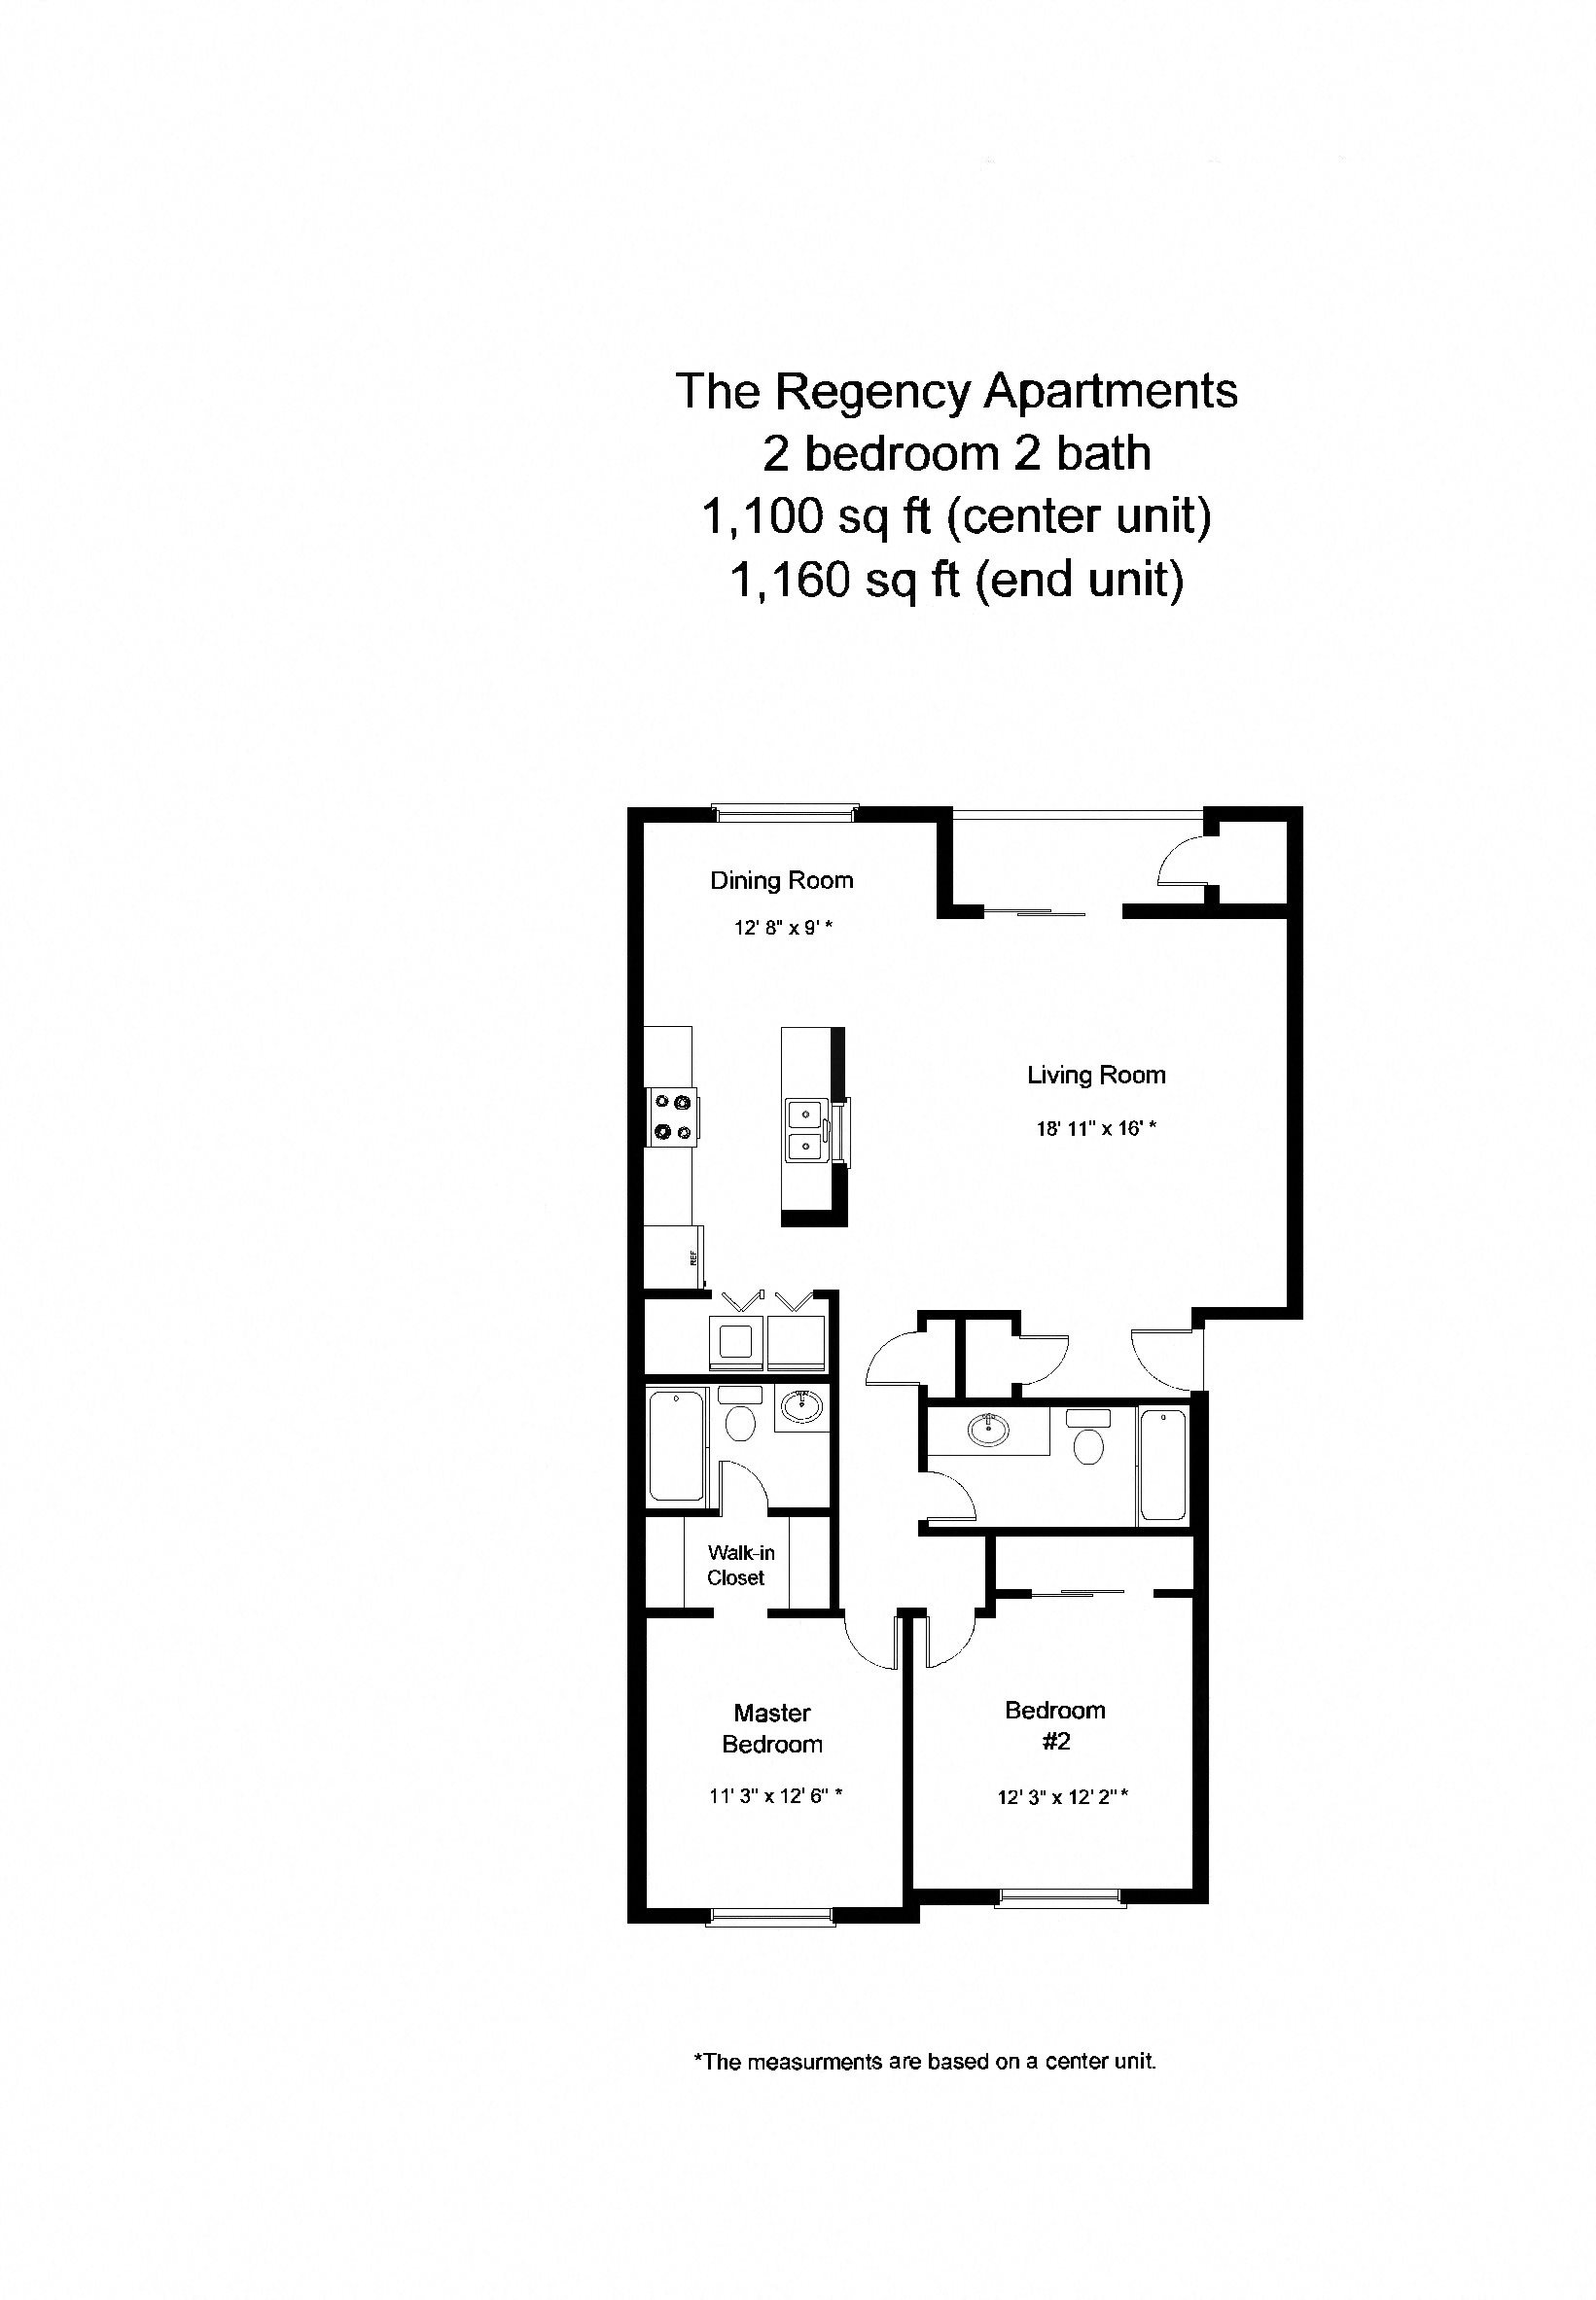 Floor Plans for Apartments in Lacey WA Regency Apartments